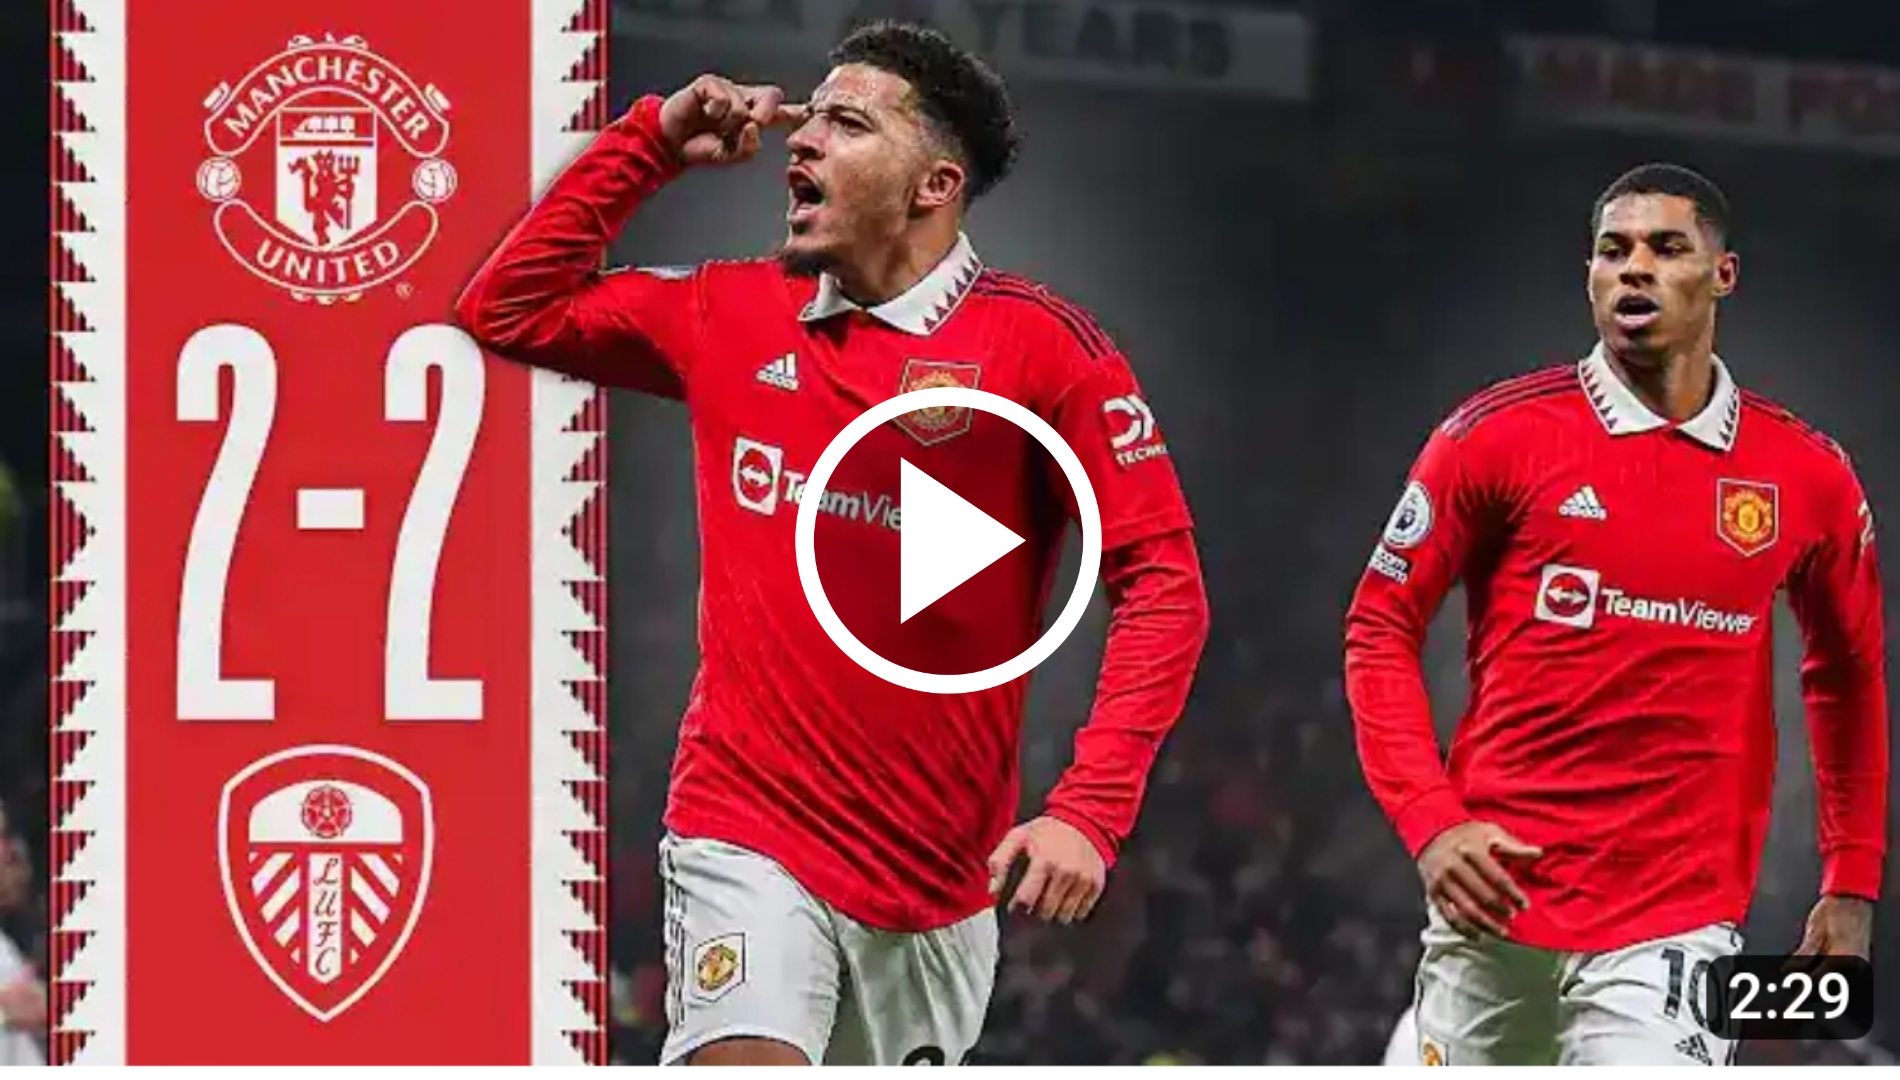 Highlights: Watch Man United vs Leeds united (2-2) extended highlights and goals 14 Sportelo